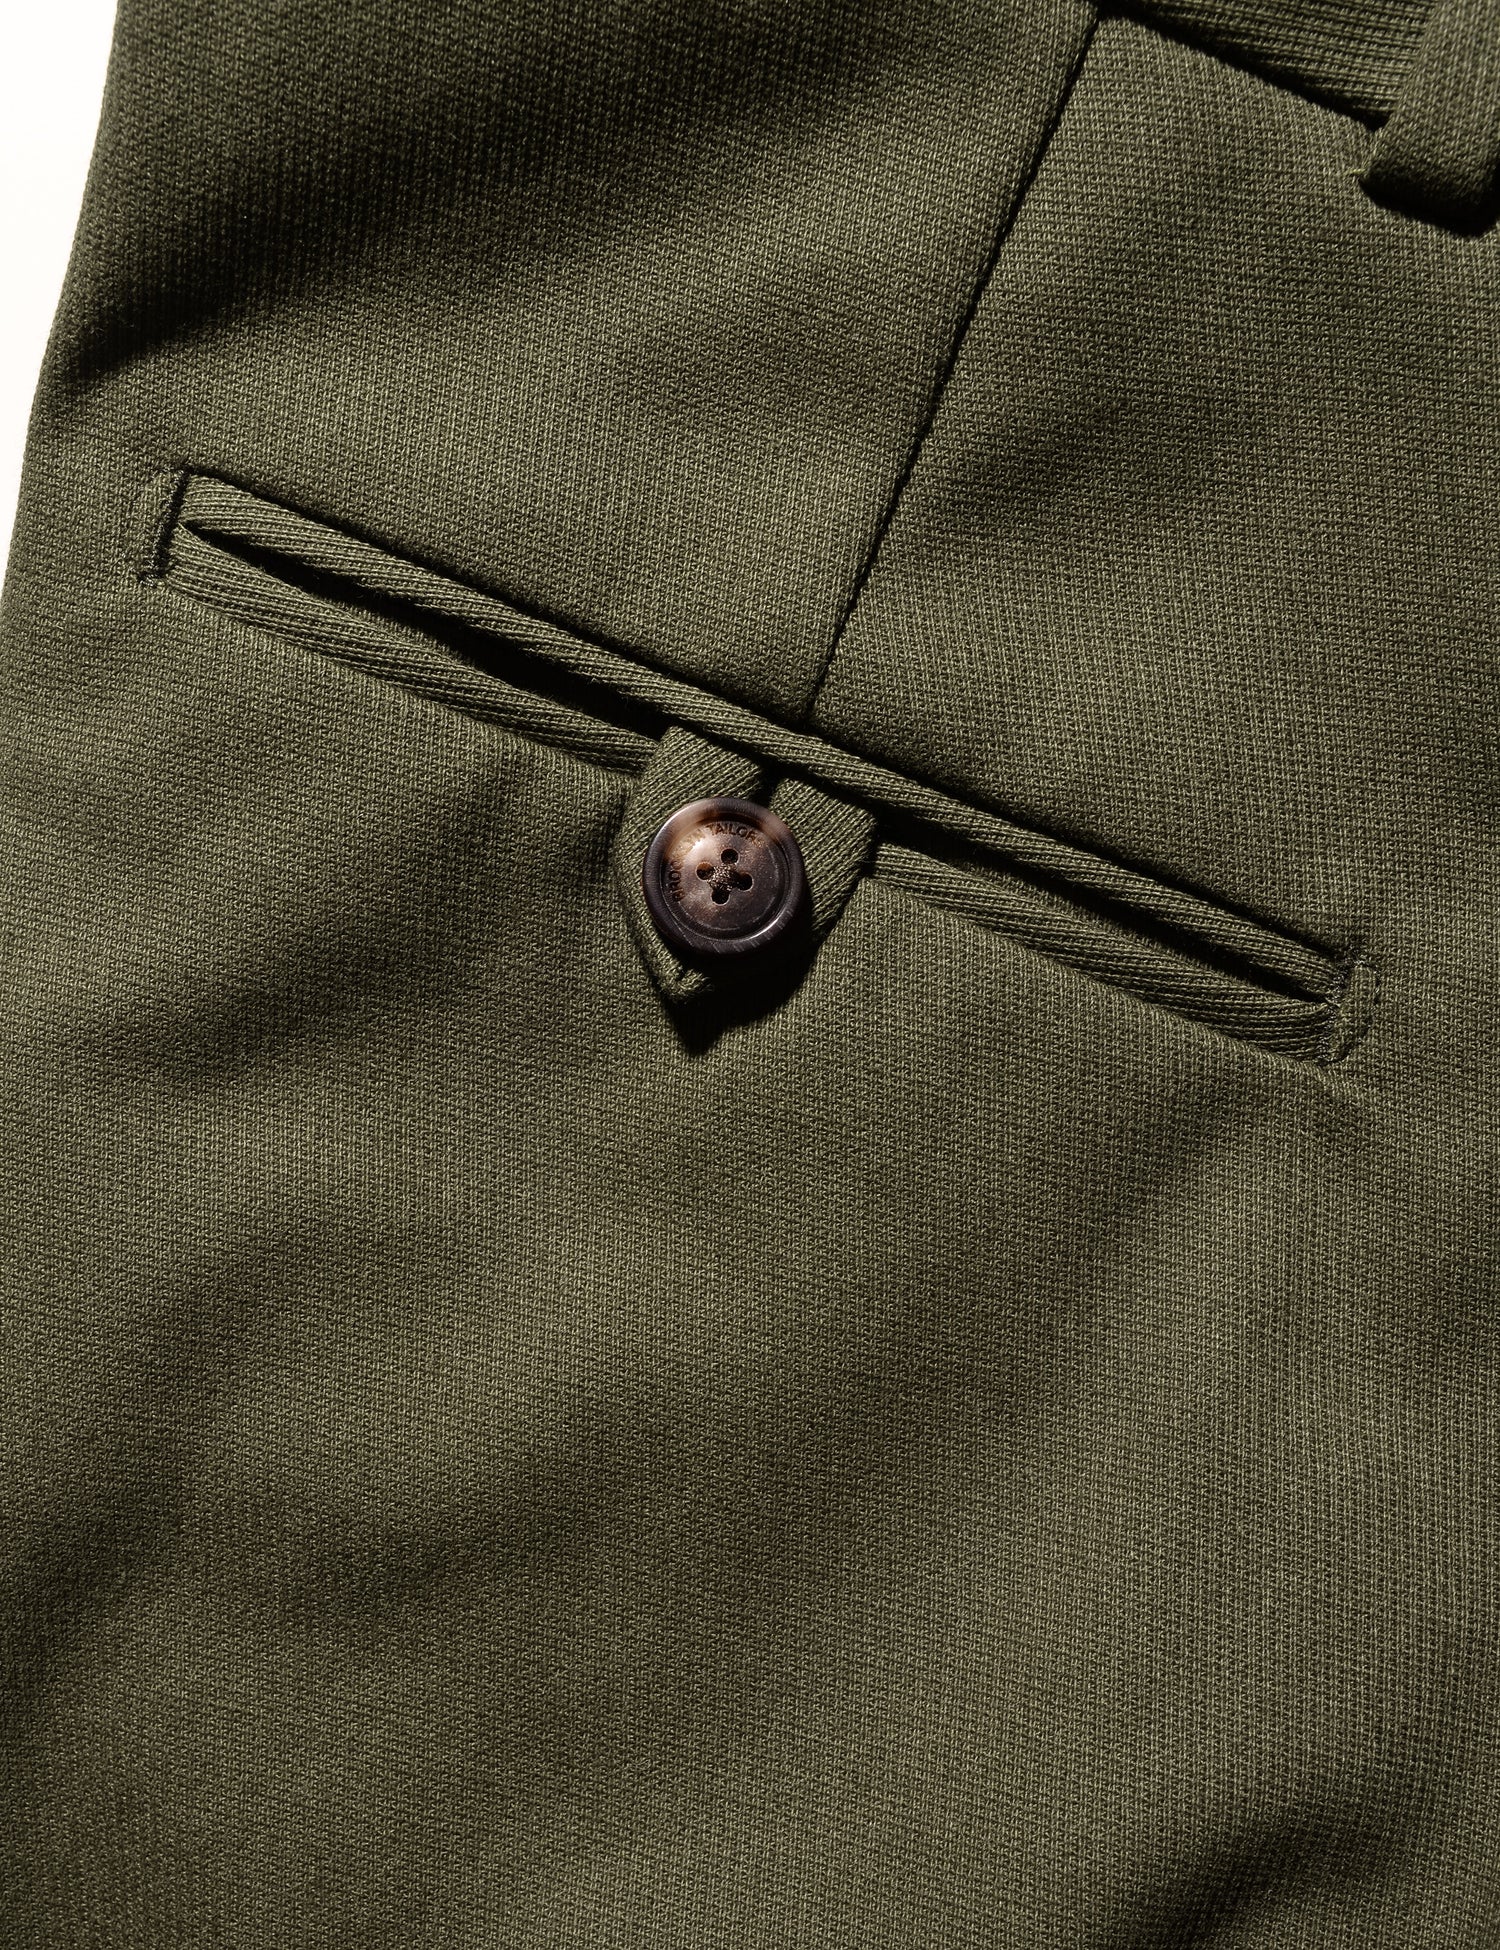 Detail shot of Brooklyn Tailors BKT50 Tailored Trousers in Cavalry Twill - Olive showing back pocket